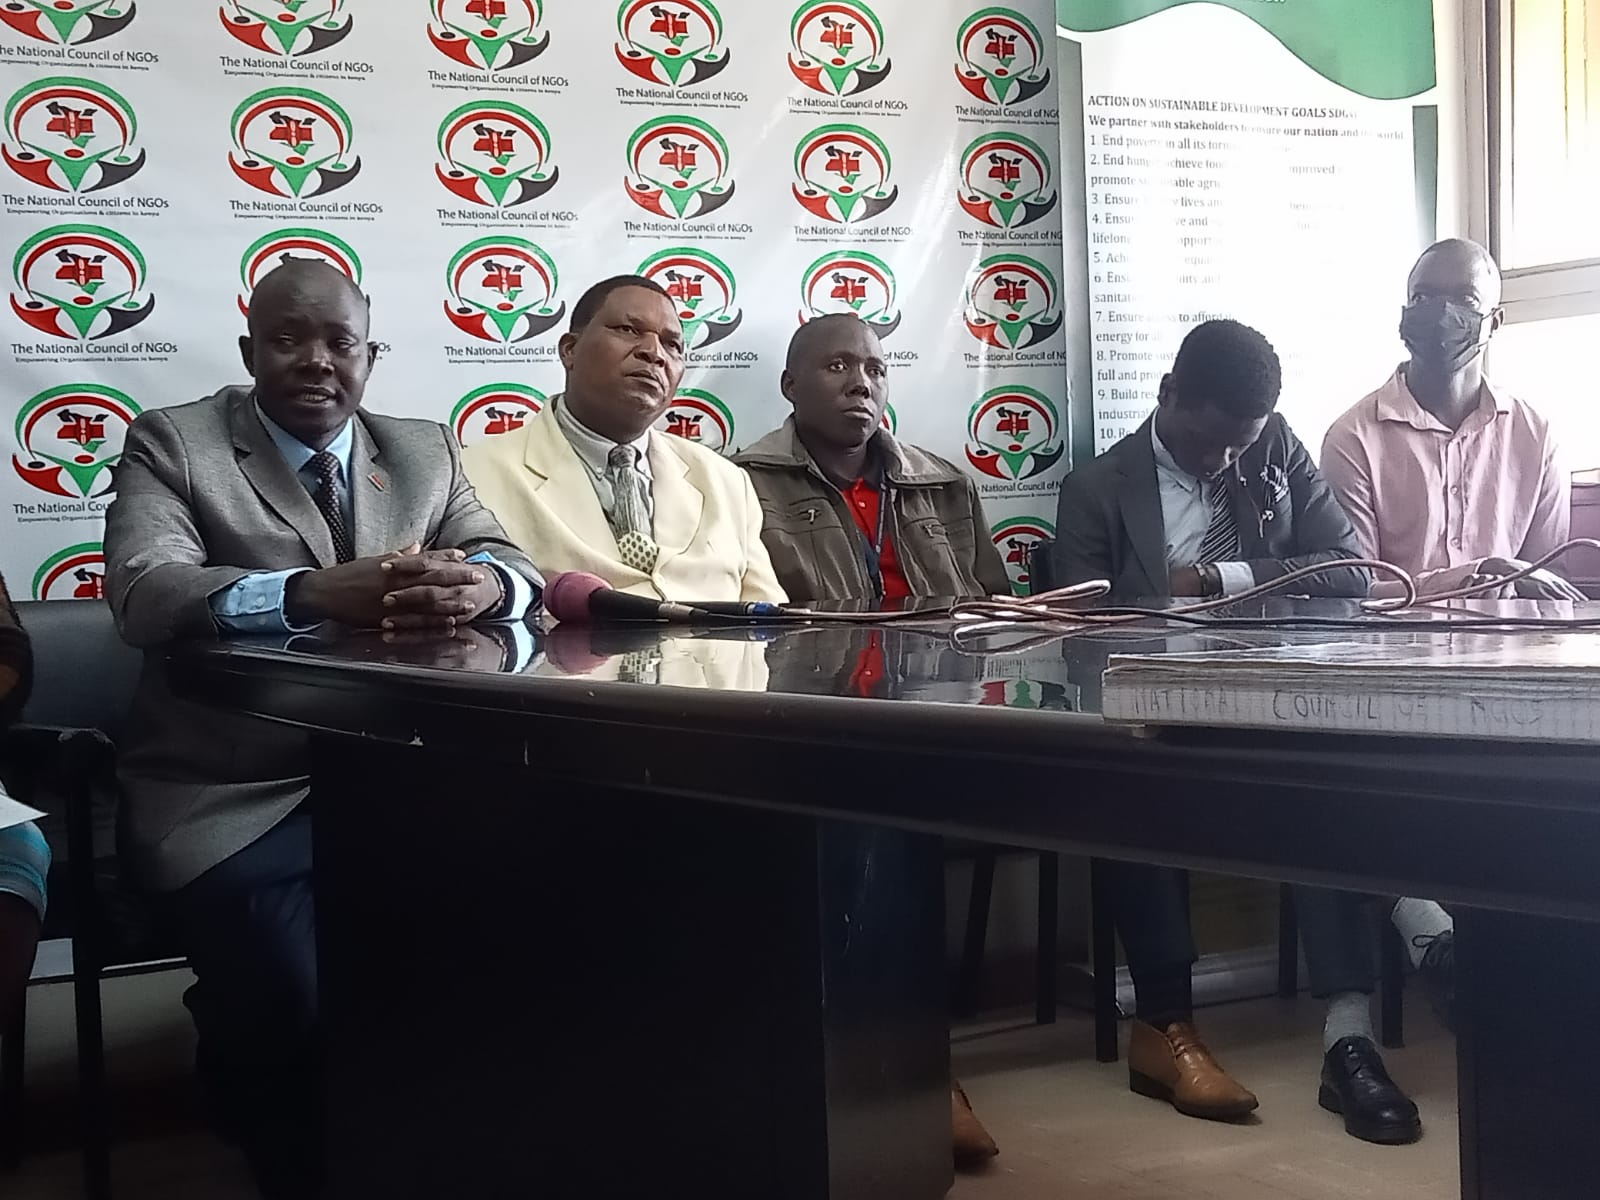 The NGO Council Of Kenya Condemns Incitement And Intolerance 